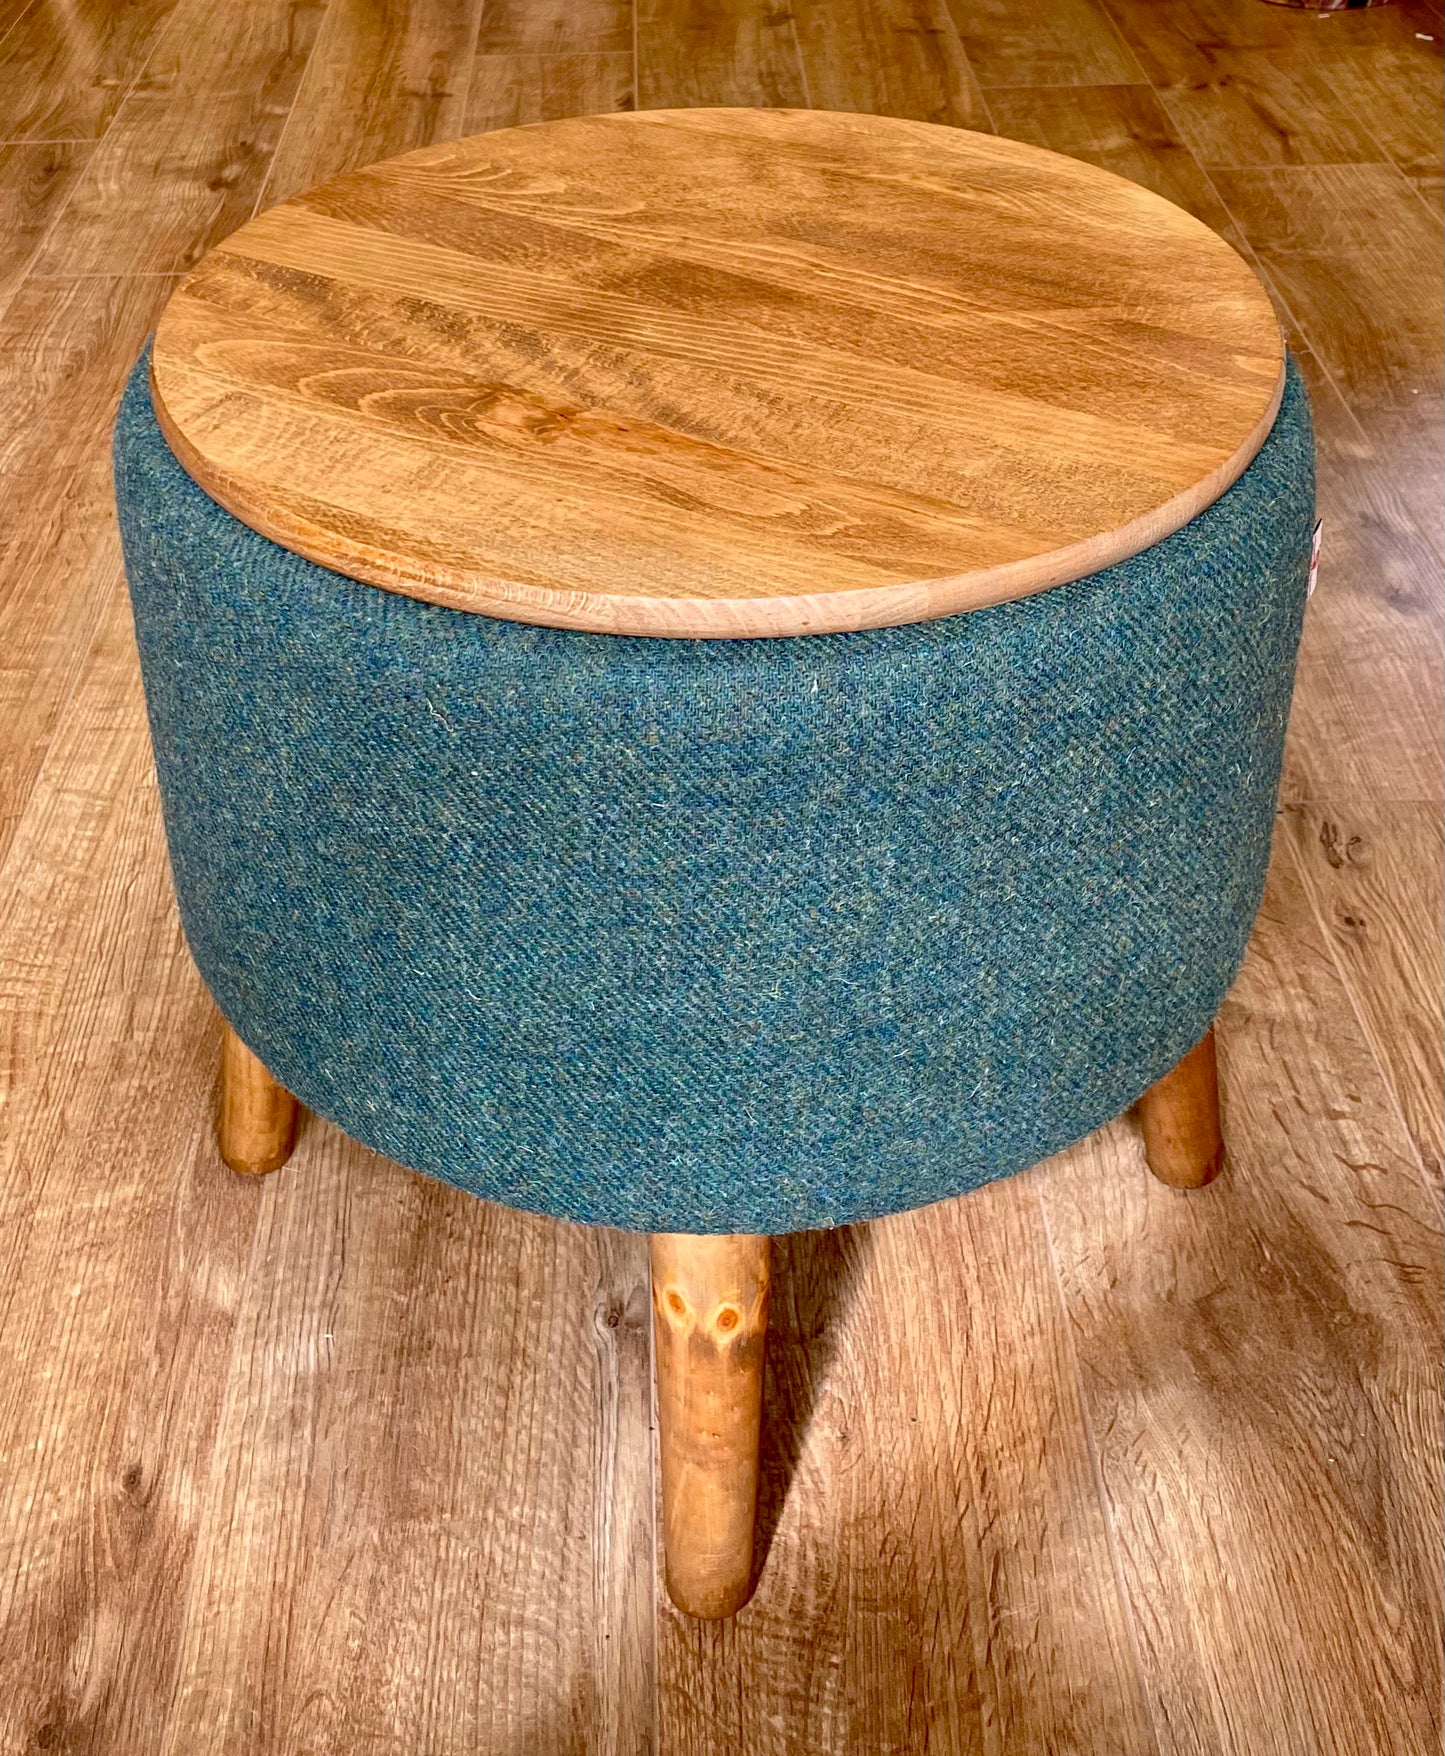 Deep Green End Table: Harris Tweed with Rustic Wooden Legs and Top